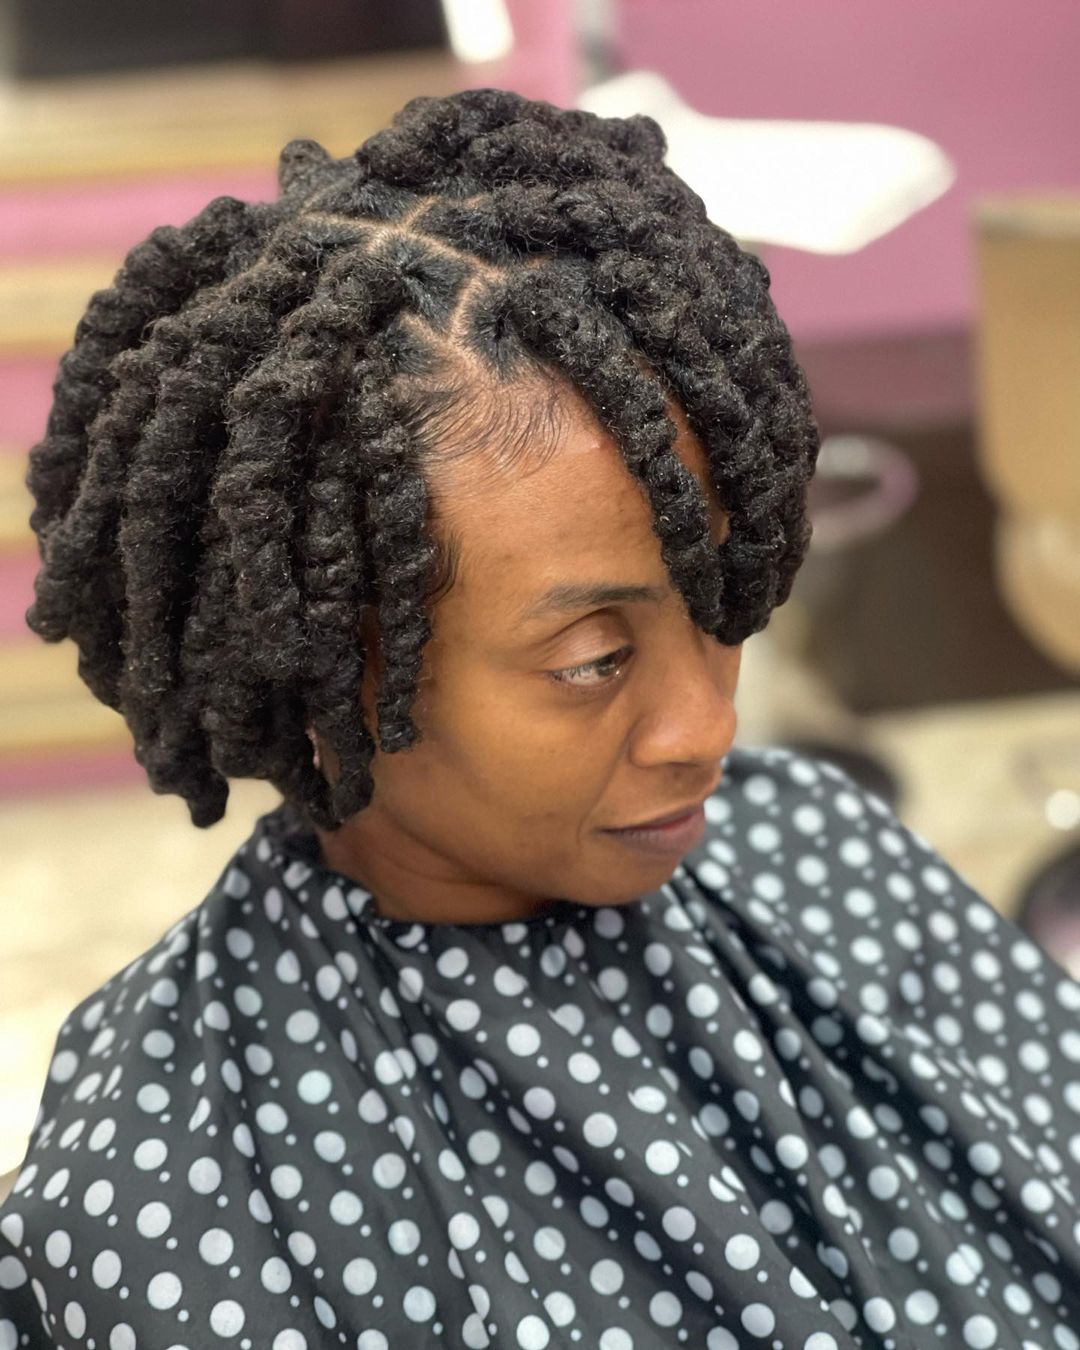 Chic And Simple Short Dread Style